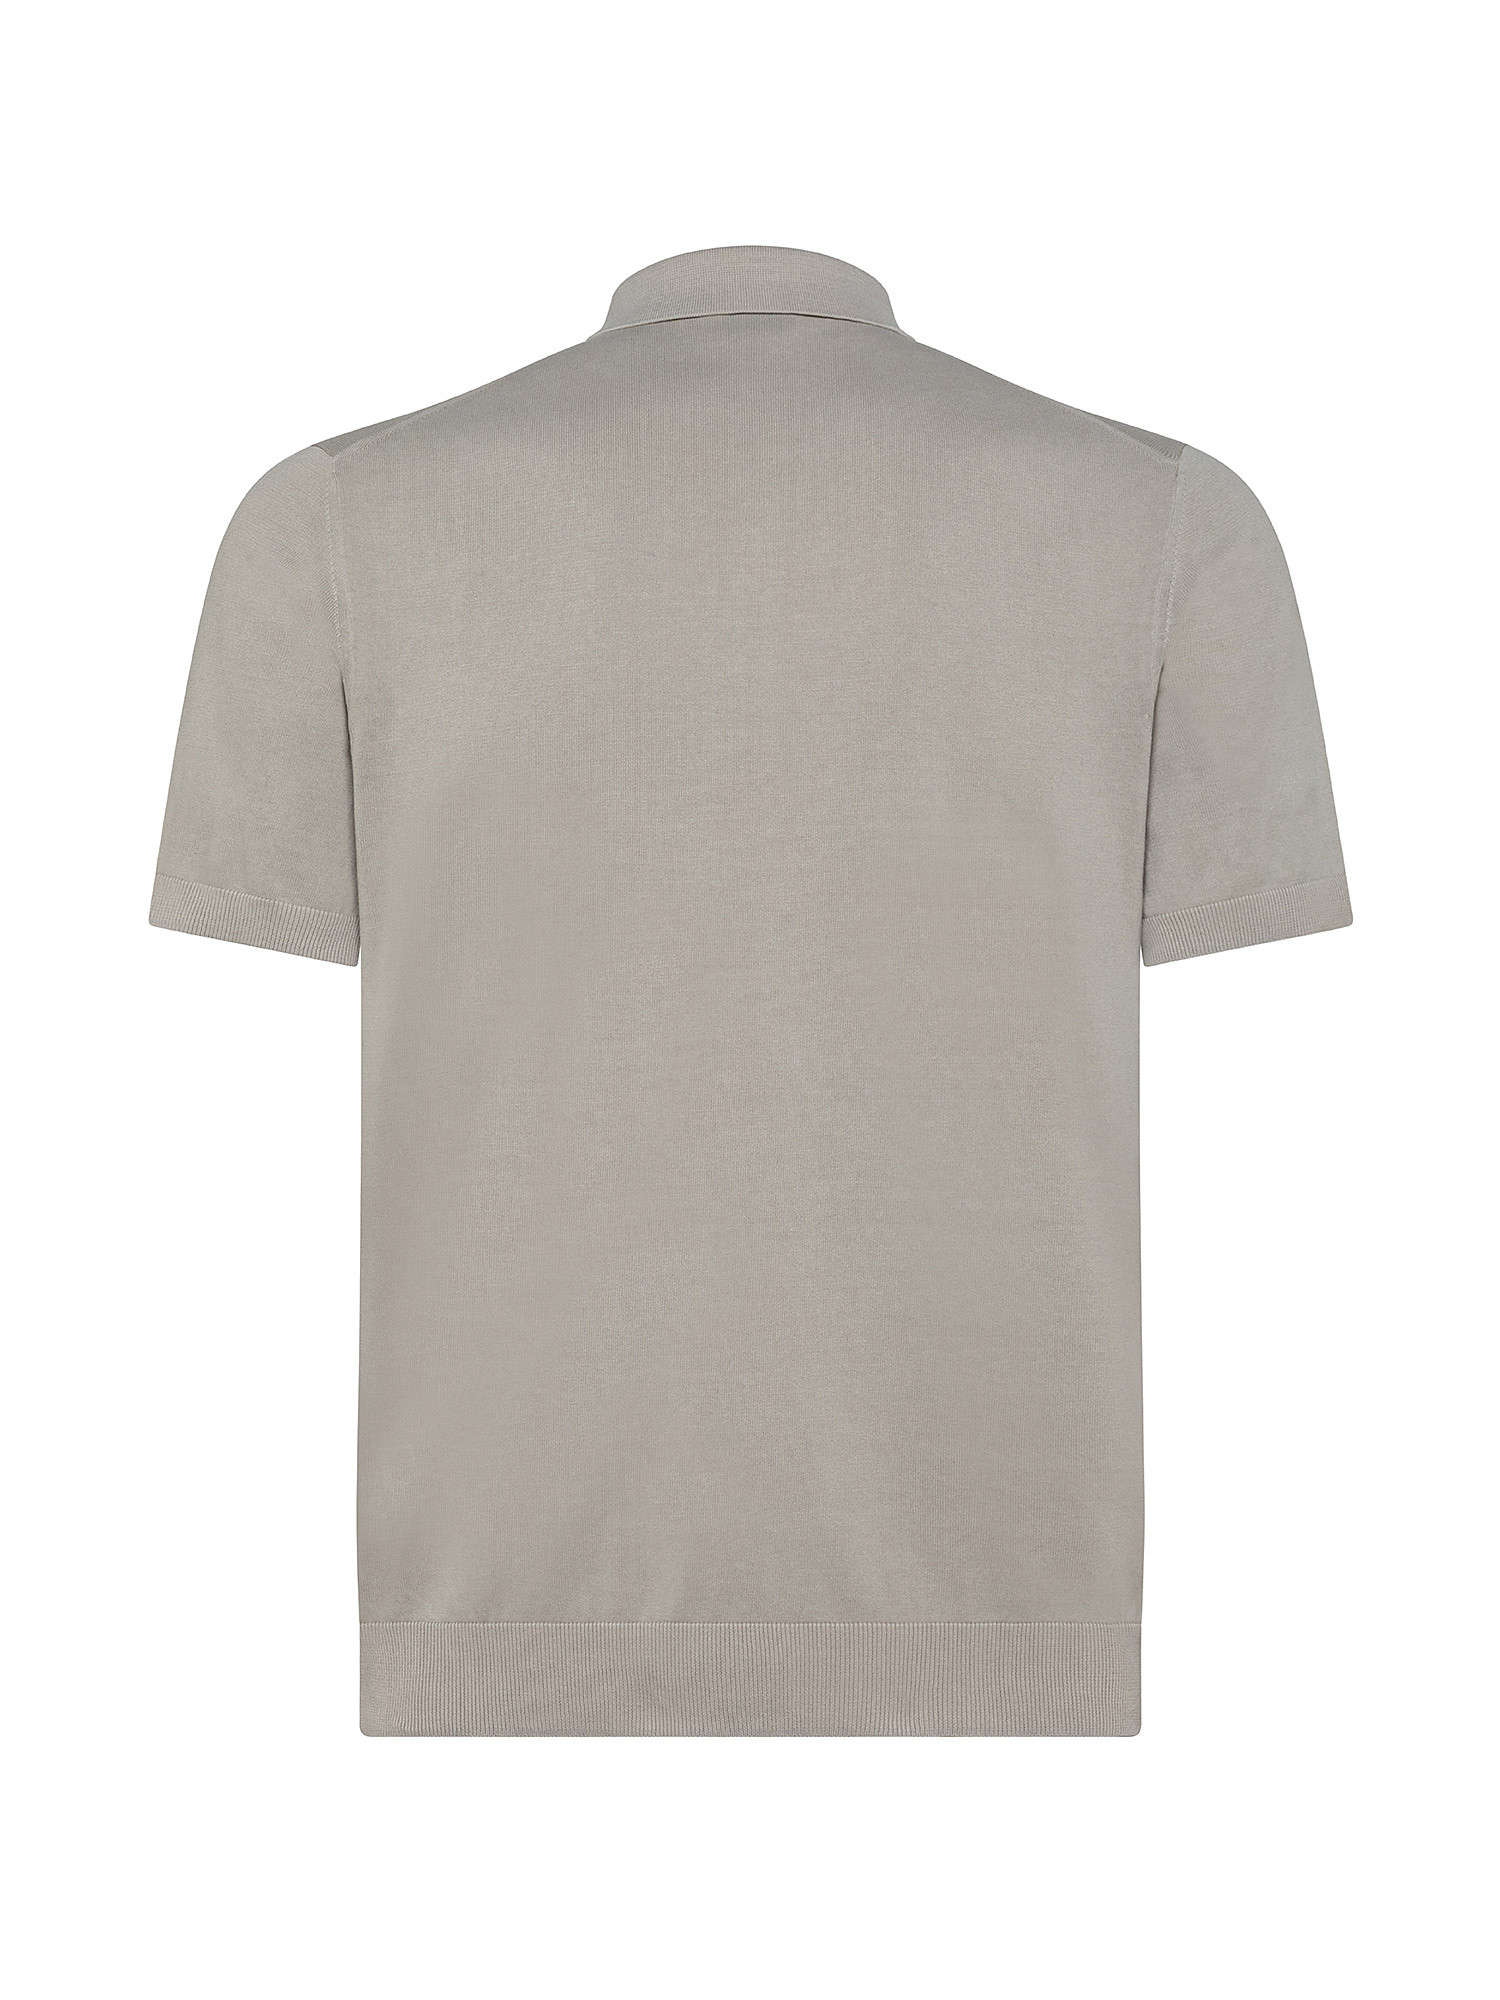 Cotton knit polo shirt, Light Grey, large image number 1